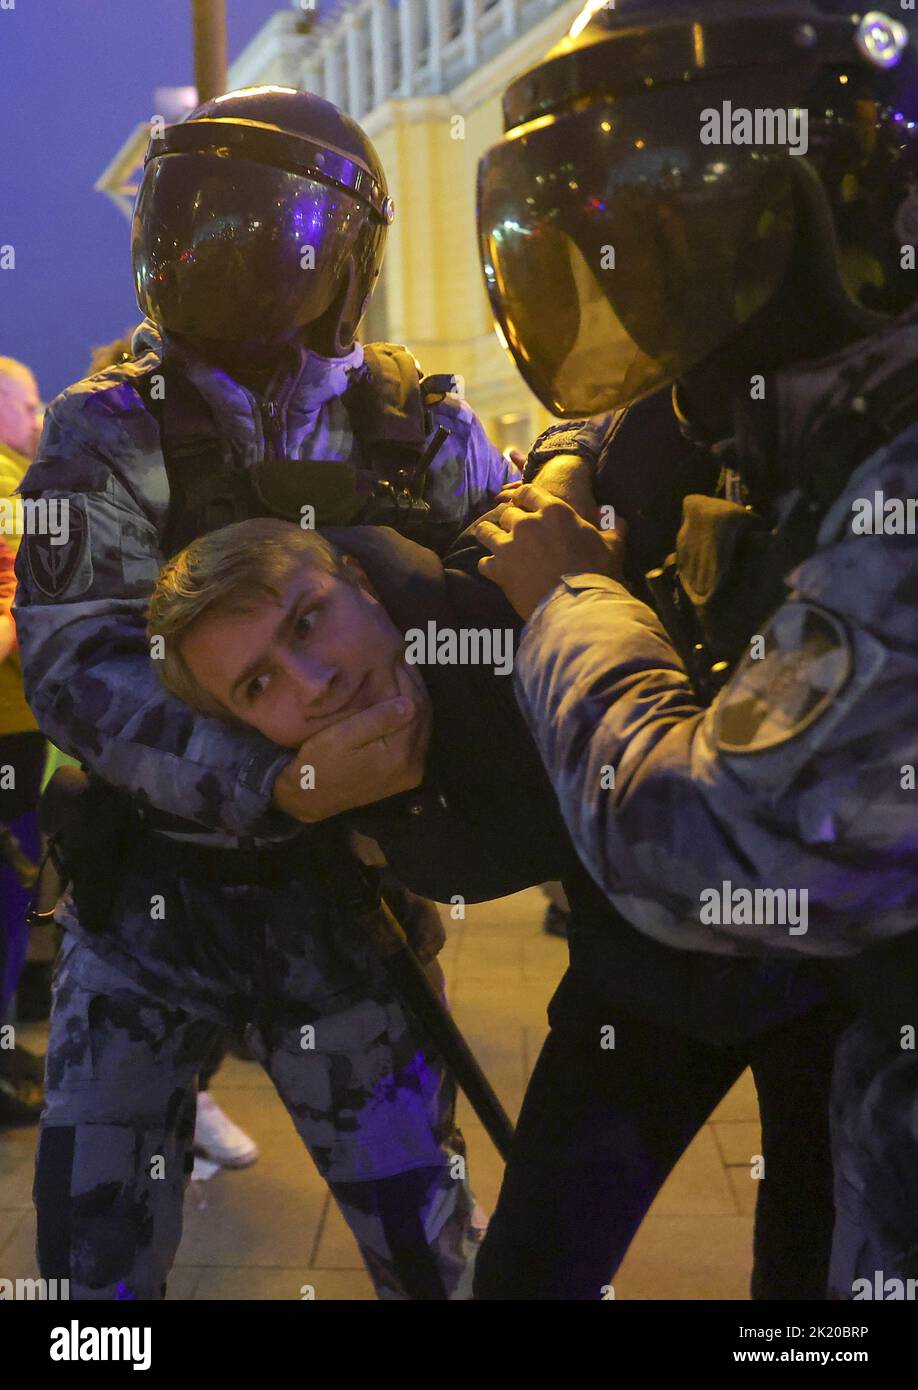 Russian police officers detain a man during an unsanctioned rally, after opposition activists called for street protests against the mobilisation of reservists ordered by President Vladimir Putin, in Moscow, Russia September 21, 2022. REUTERS/REUTERS PHOTOGRAPHER Stock Photo